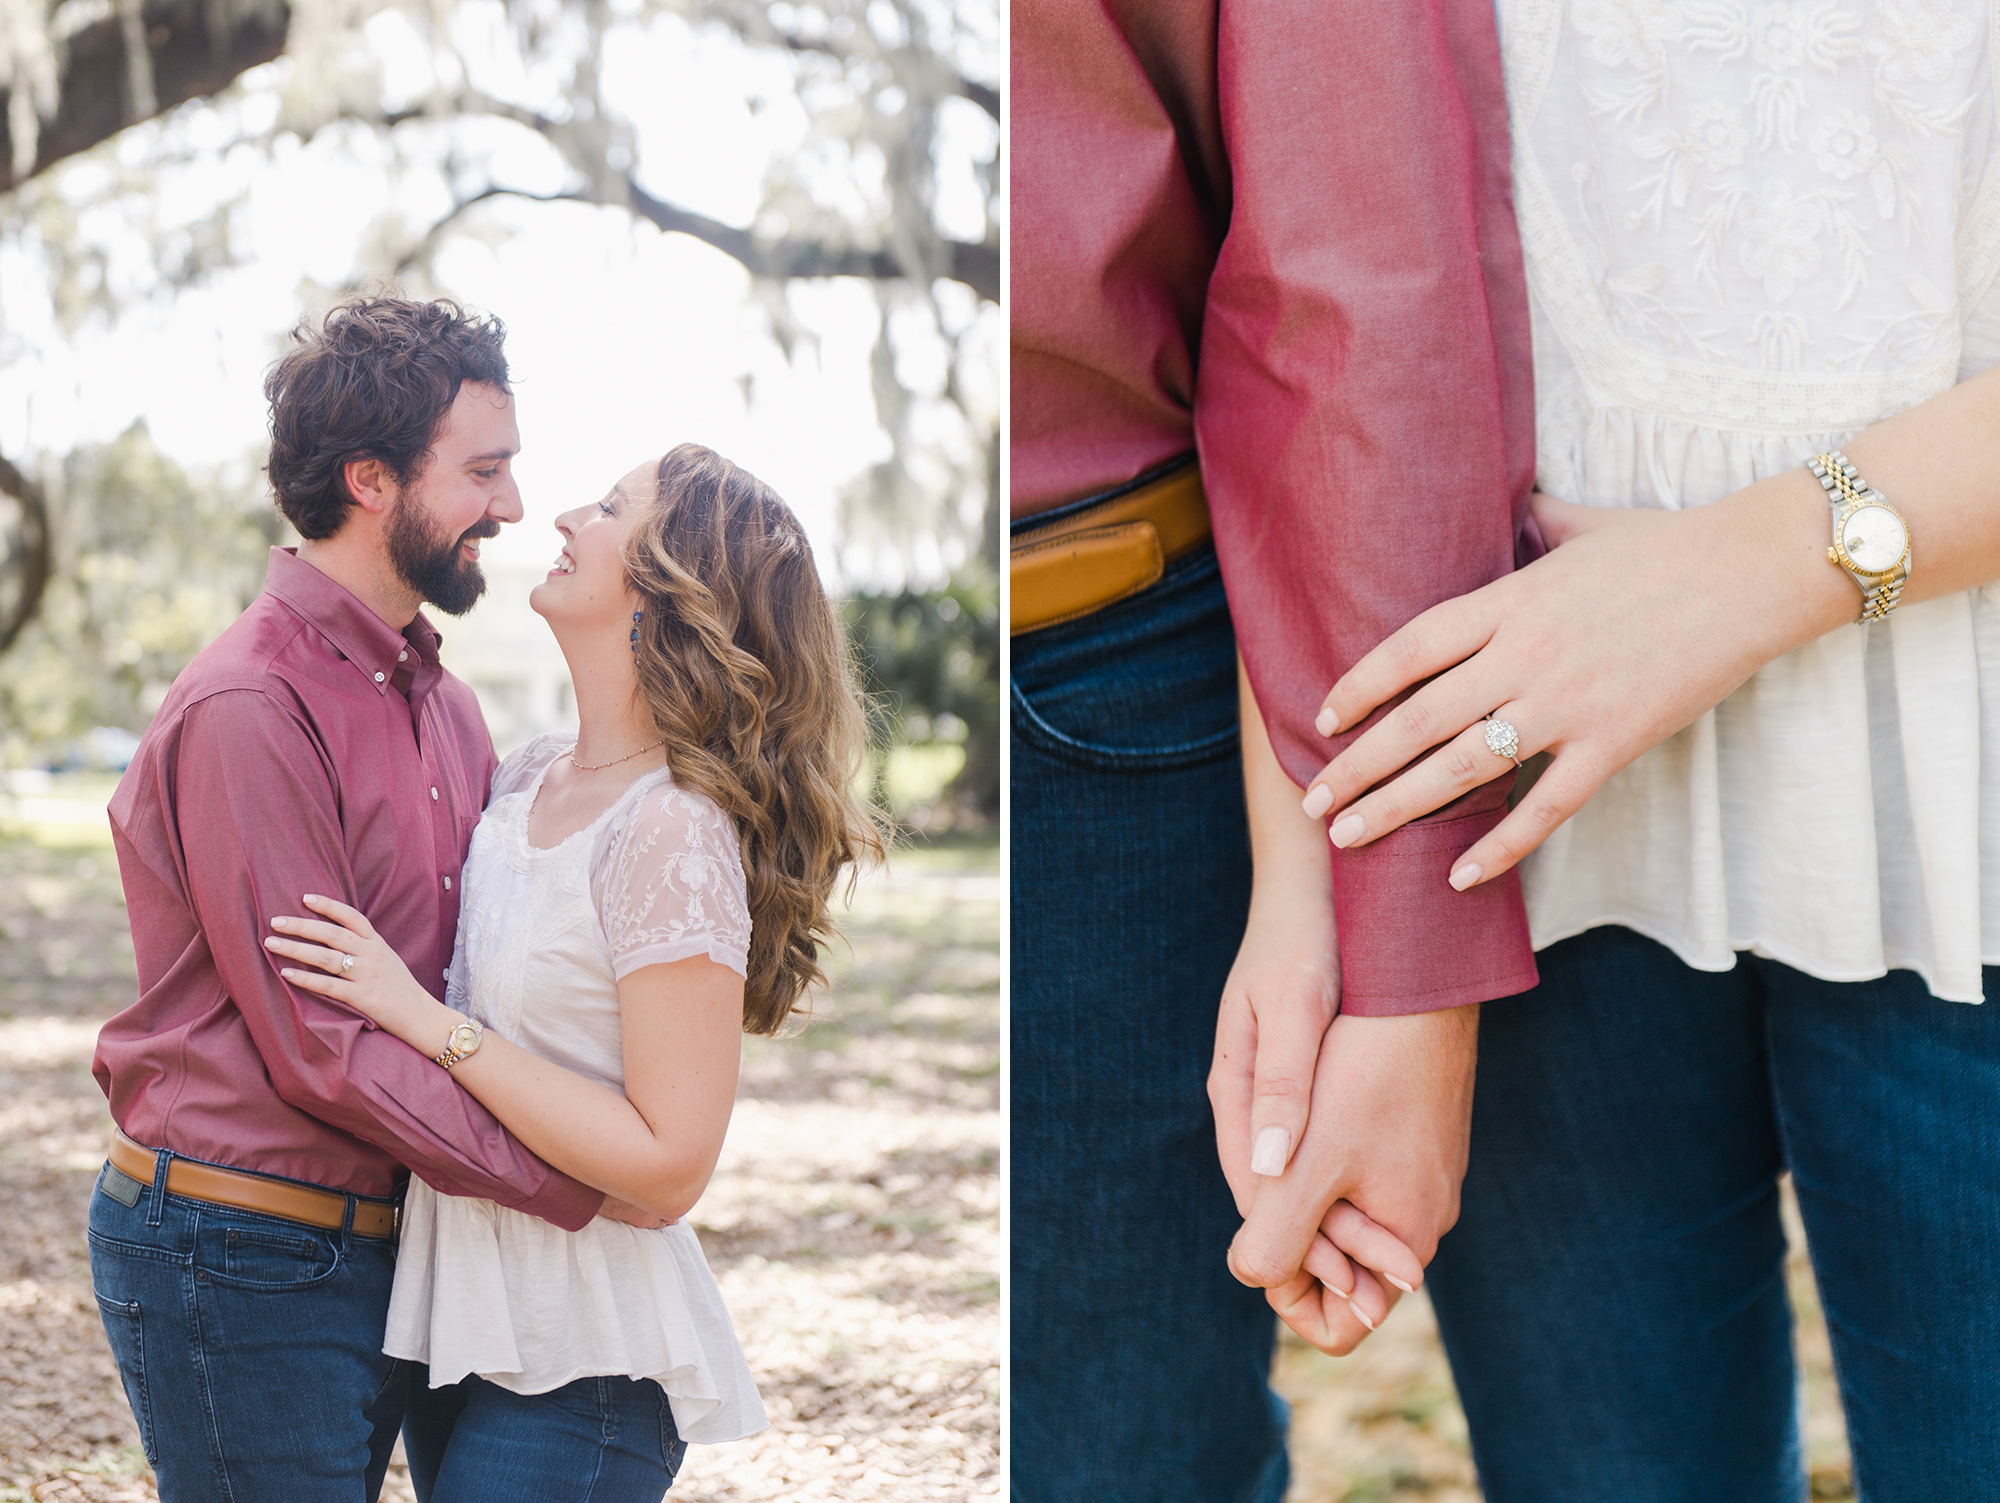 engaged couple in park with rings holding hands